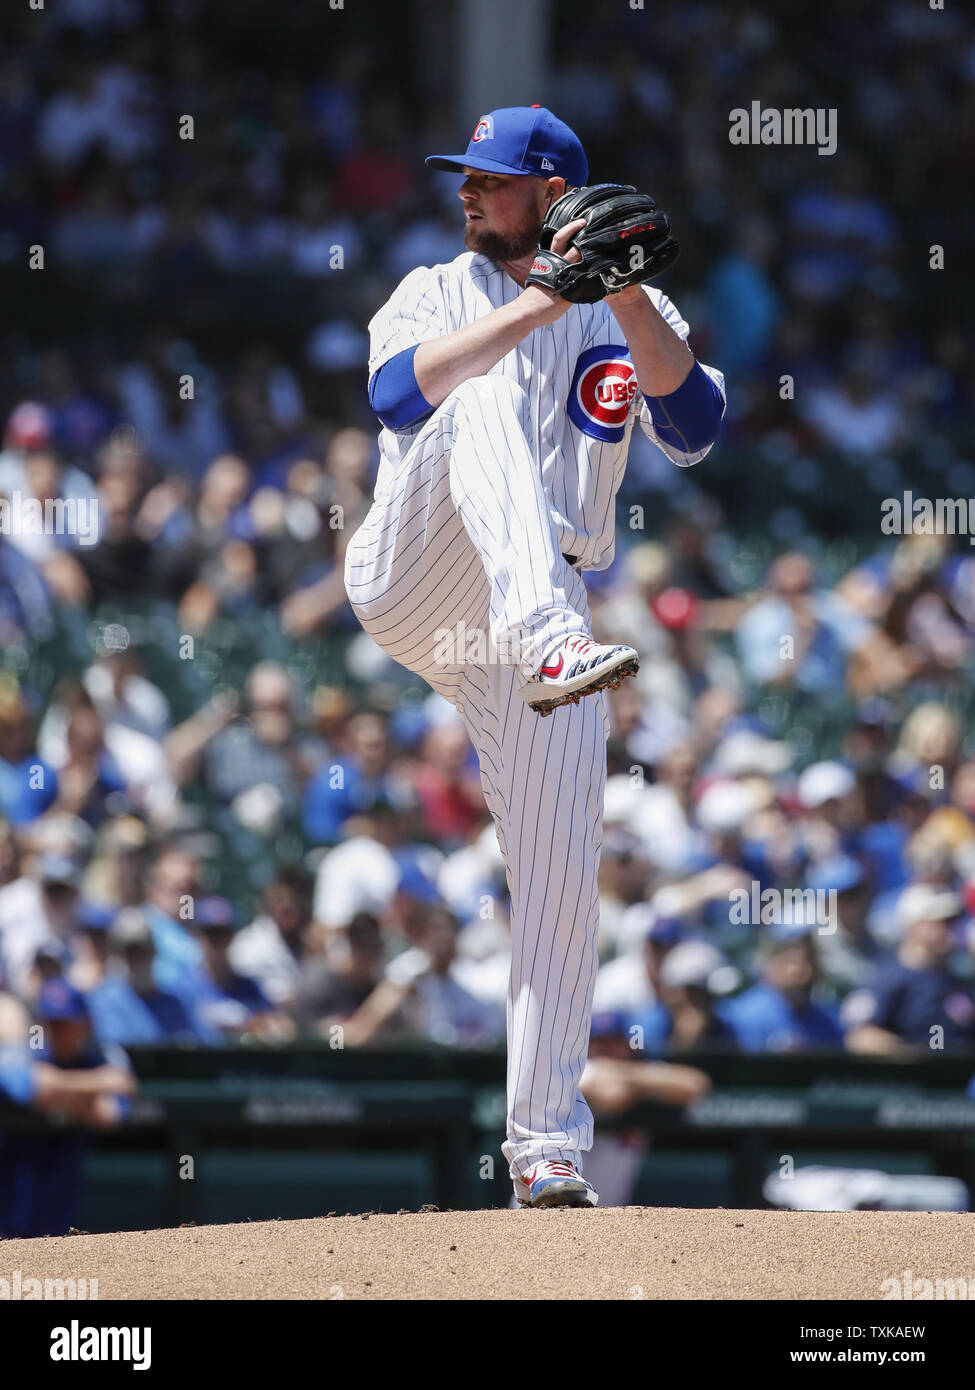 Chicago Cubs starting pitcher Jon Lester delivers against the Philadelphia Phillies in the first inning at Wrigley Field on May 23, 2019 in Chicago. Photo by Kamil Krzaczynski/UPI Stock Photo